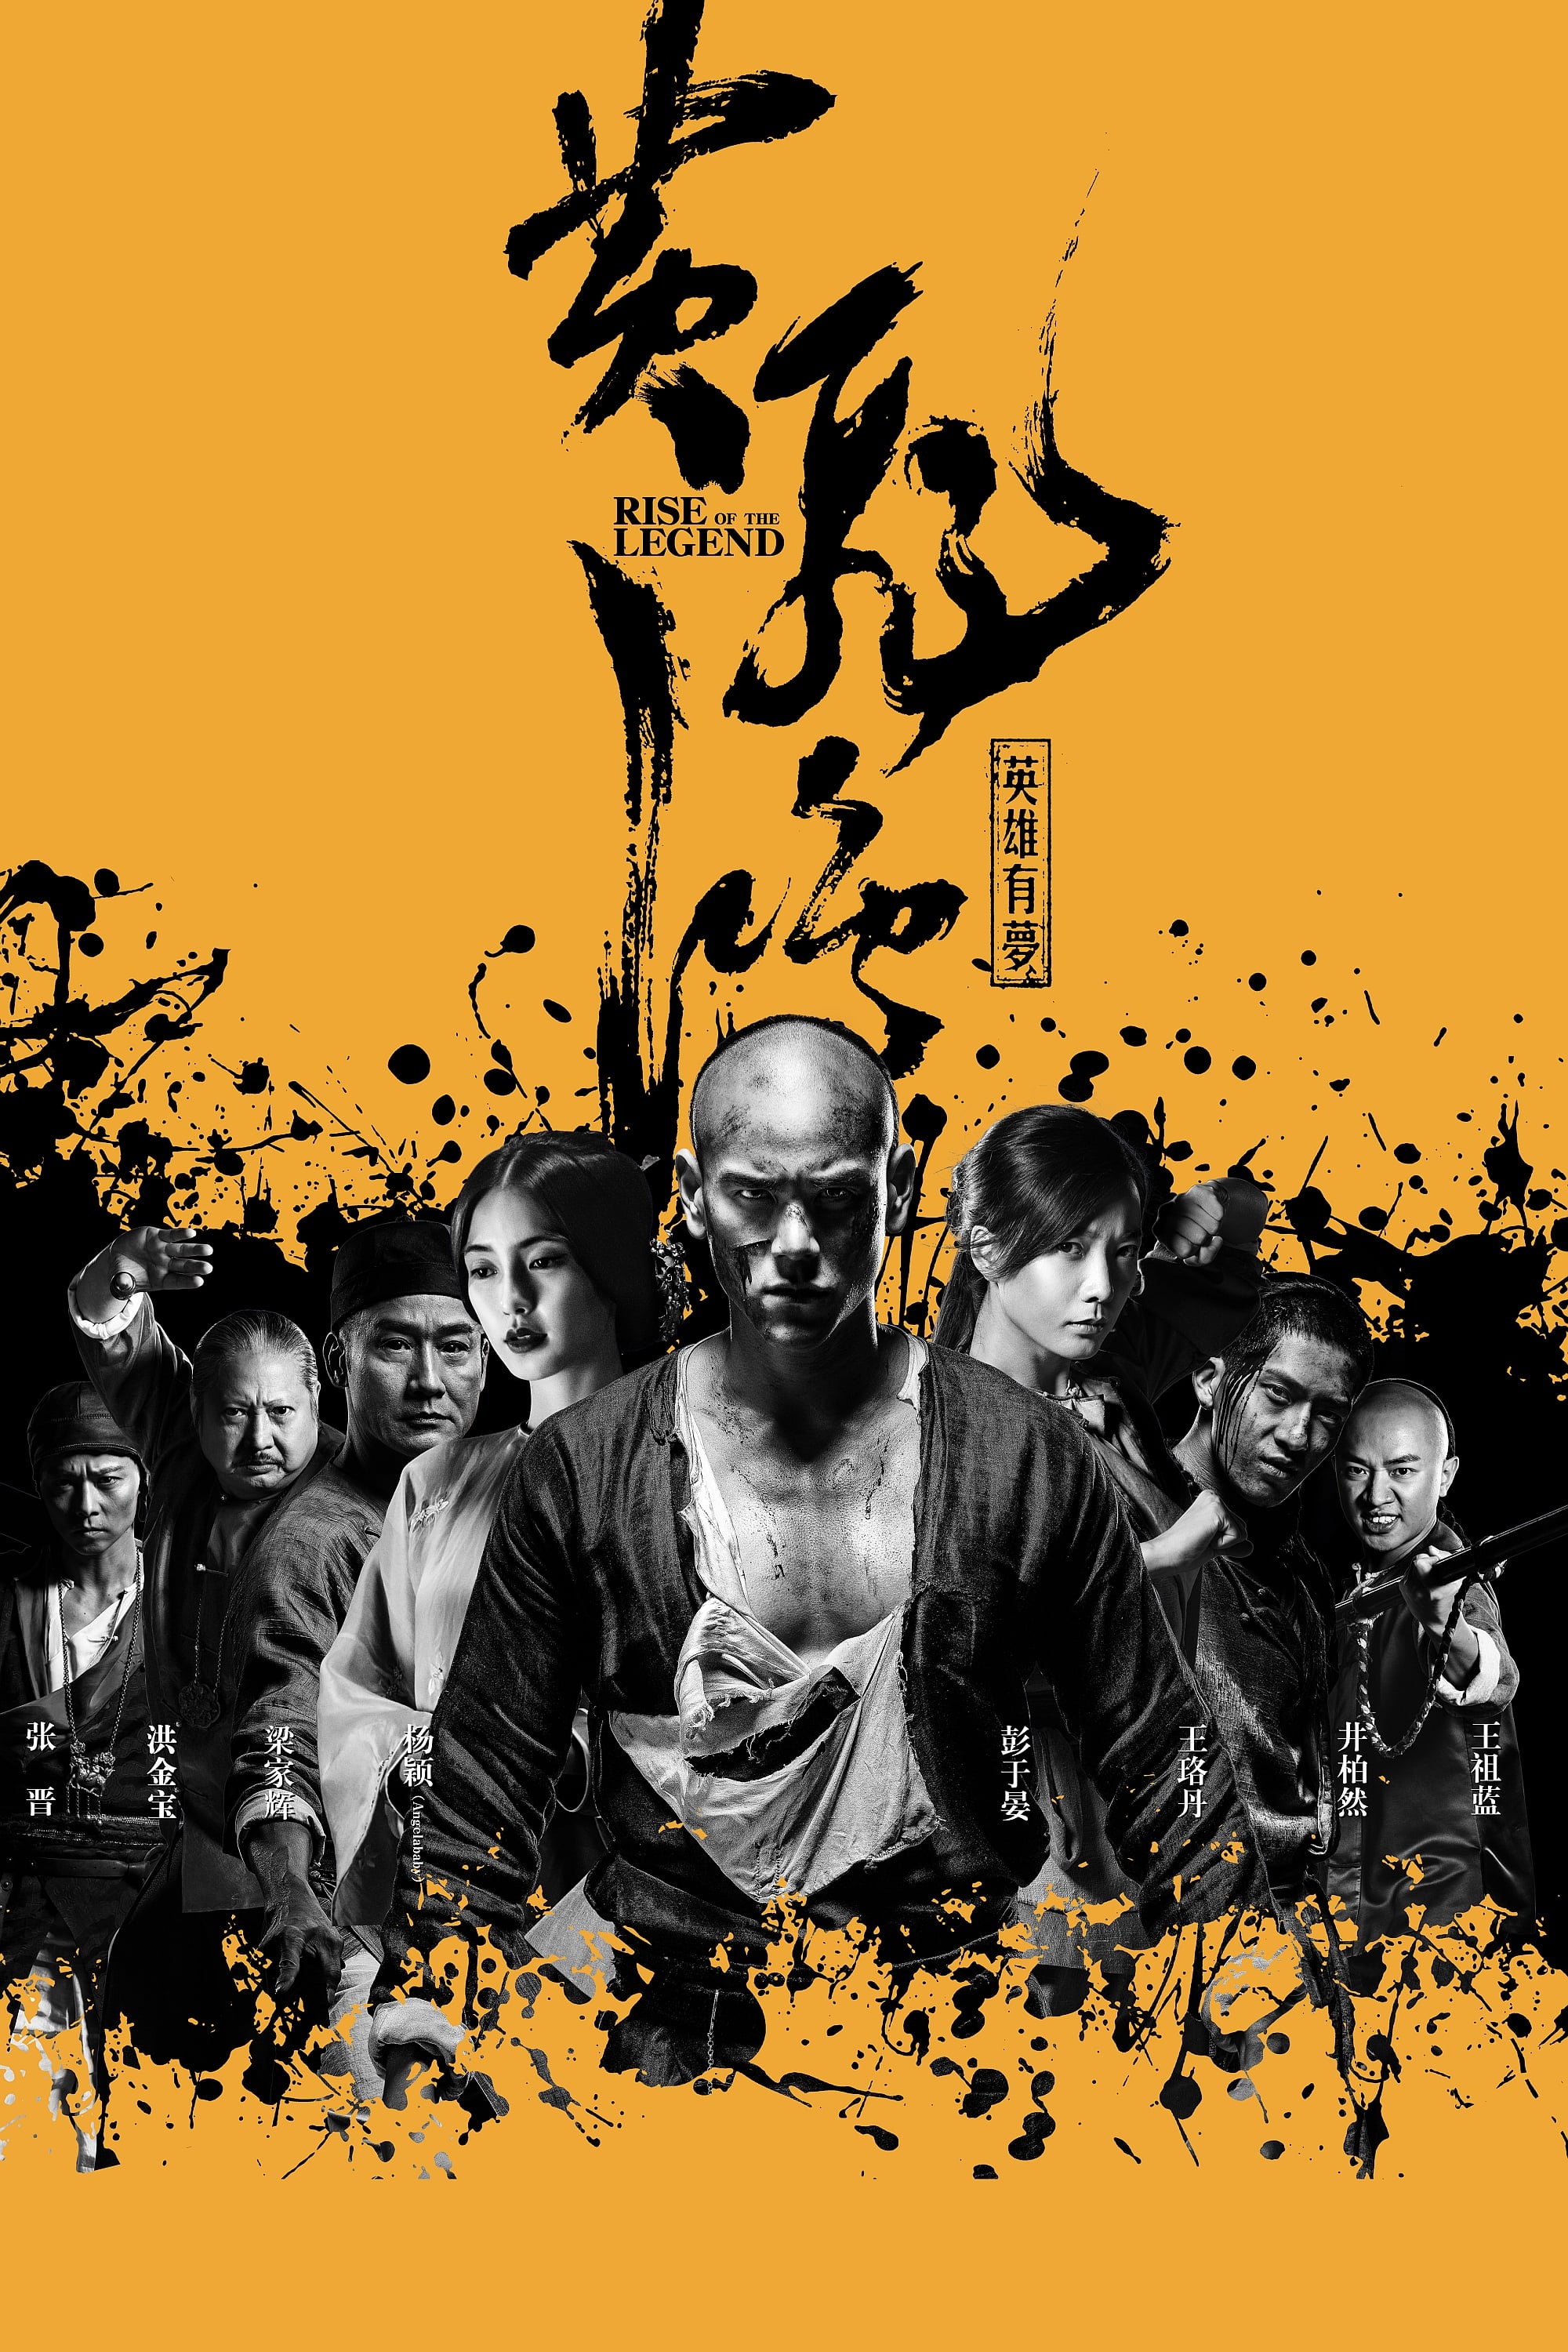 Rise of the Legend streaming sur Film Streaming - Film 2014 - Streaming hd vf